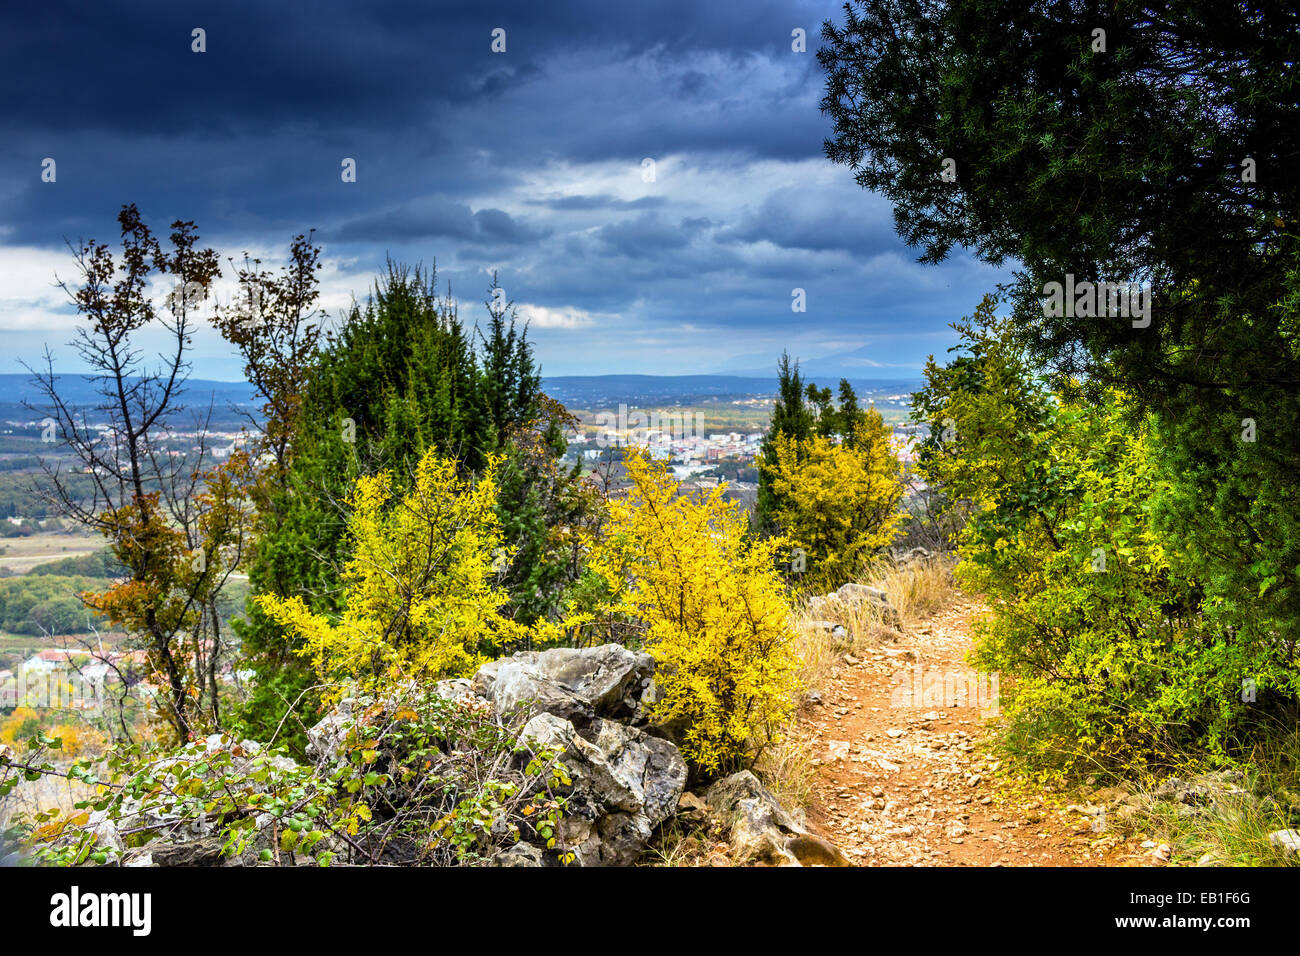 Autumn View of the Krizevac (Cross) Mountain in Medjugorje in Bosnia ed Erzegovina: brownish trees, green weeds, orange and yellow leaves and grey rocks Stock Photo